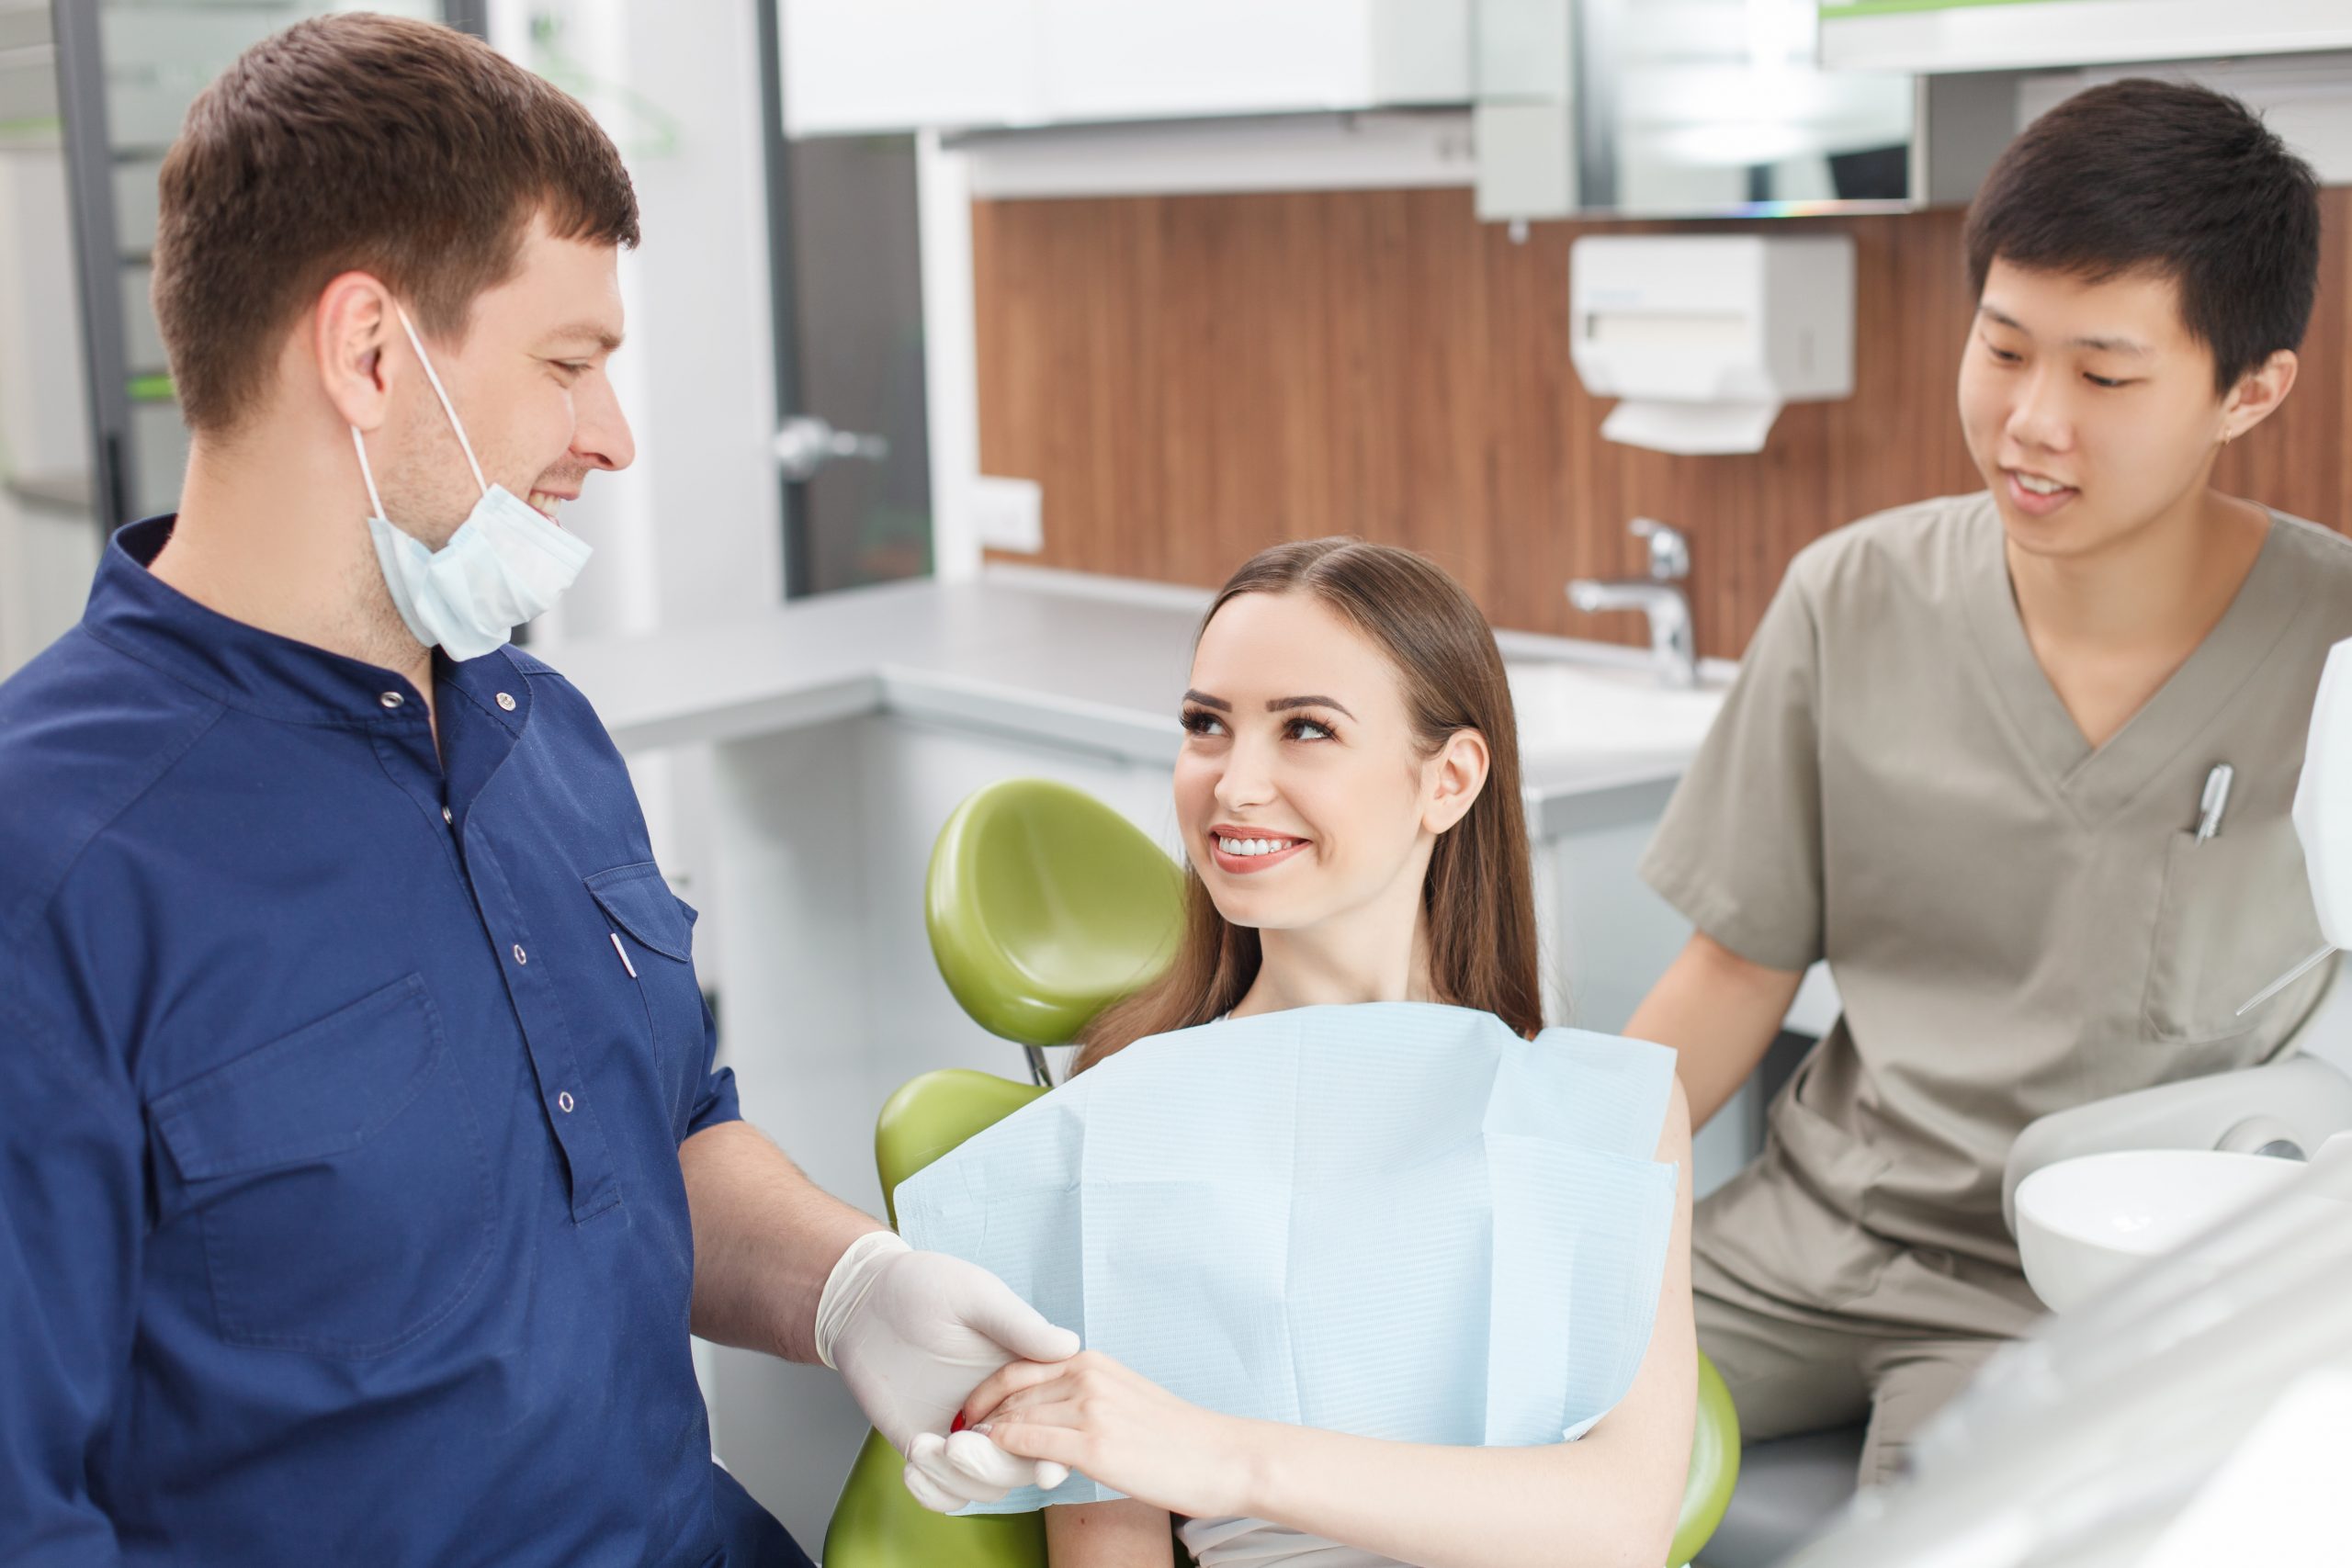 Cheerful dentist and his assistant are calming their visitor. The dentist is holding female hand with support. The woman is sitting in medical chair and looking at dentist with trust. They are smiling